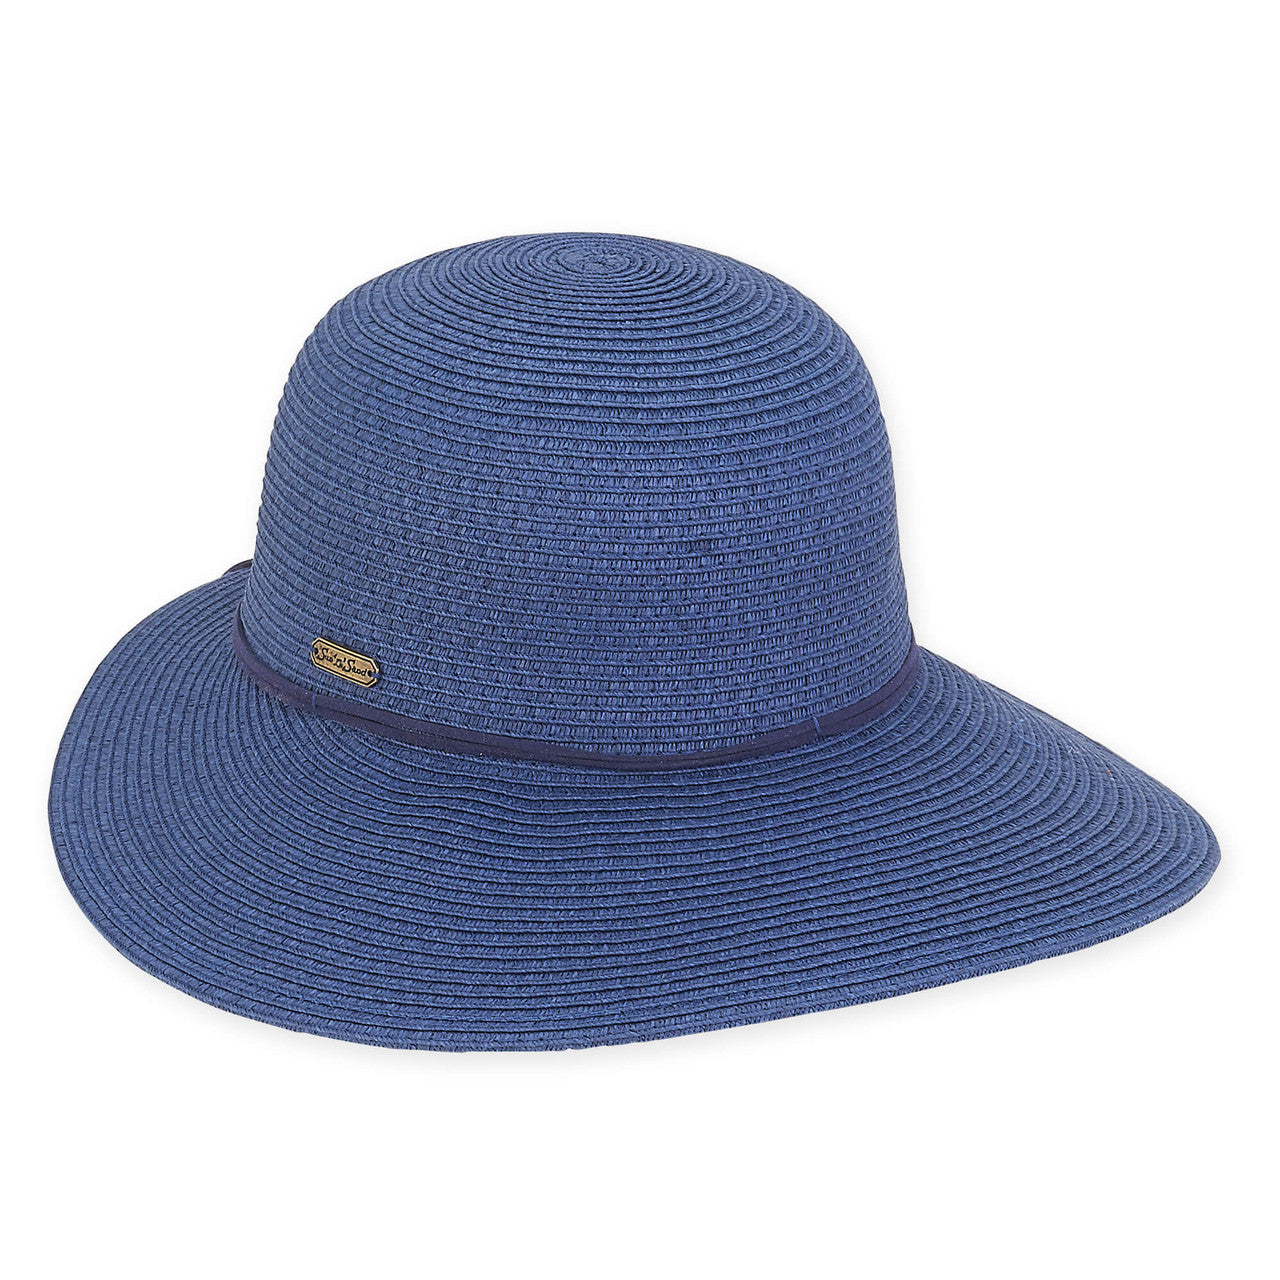 Straw Sun Hat with Leatherette Tie - Sun 'N' Sand Hats Wide Brim Hat Sun N Sand Hats HH2384E Navy OS (57 cm) 